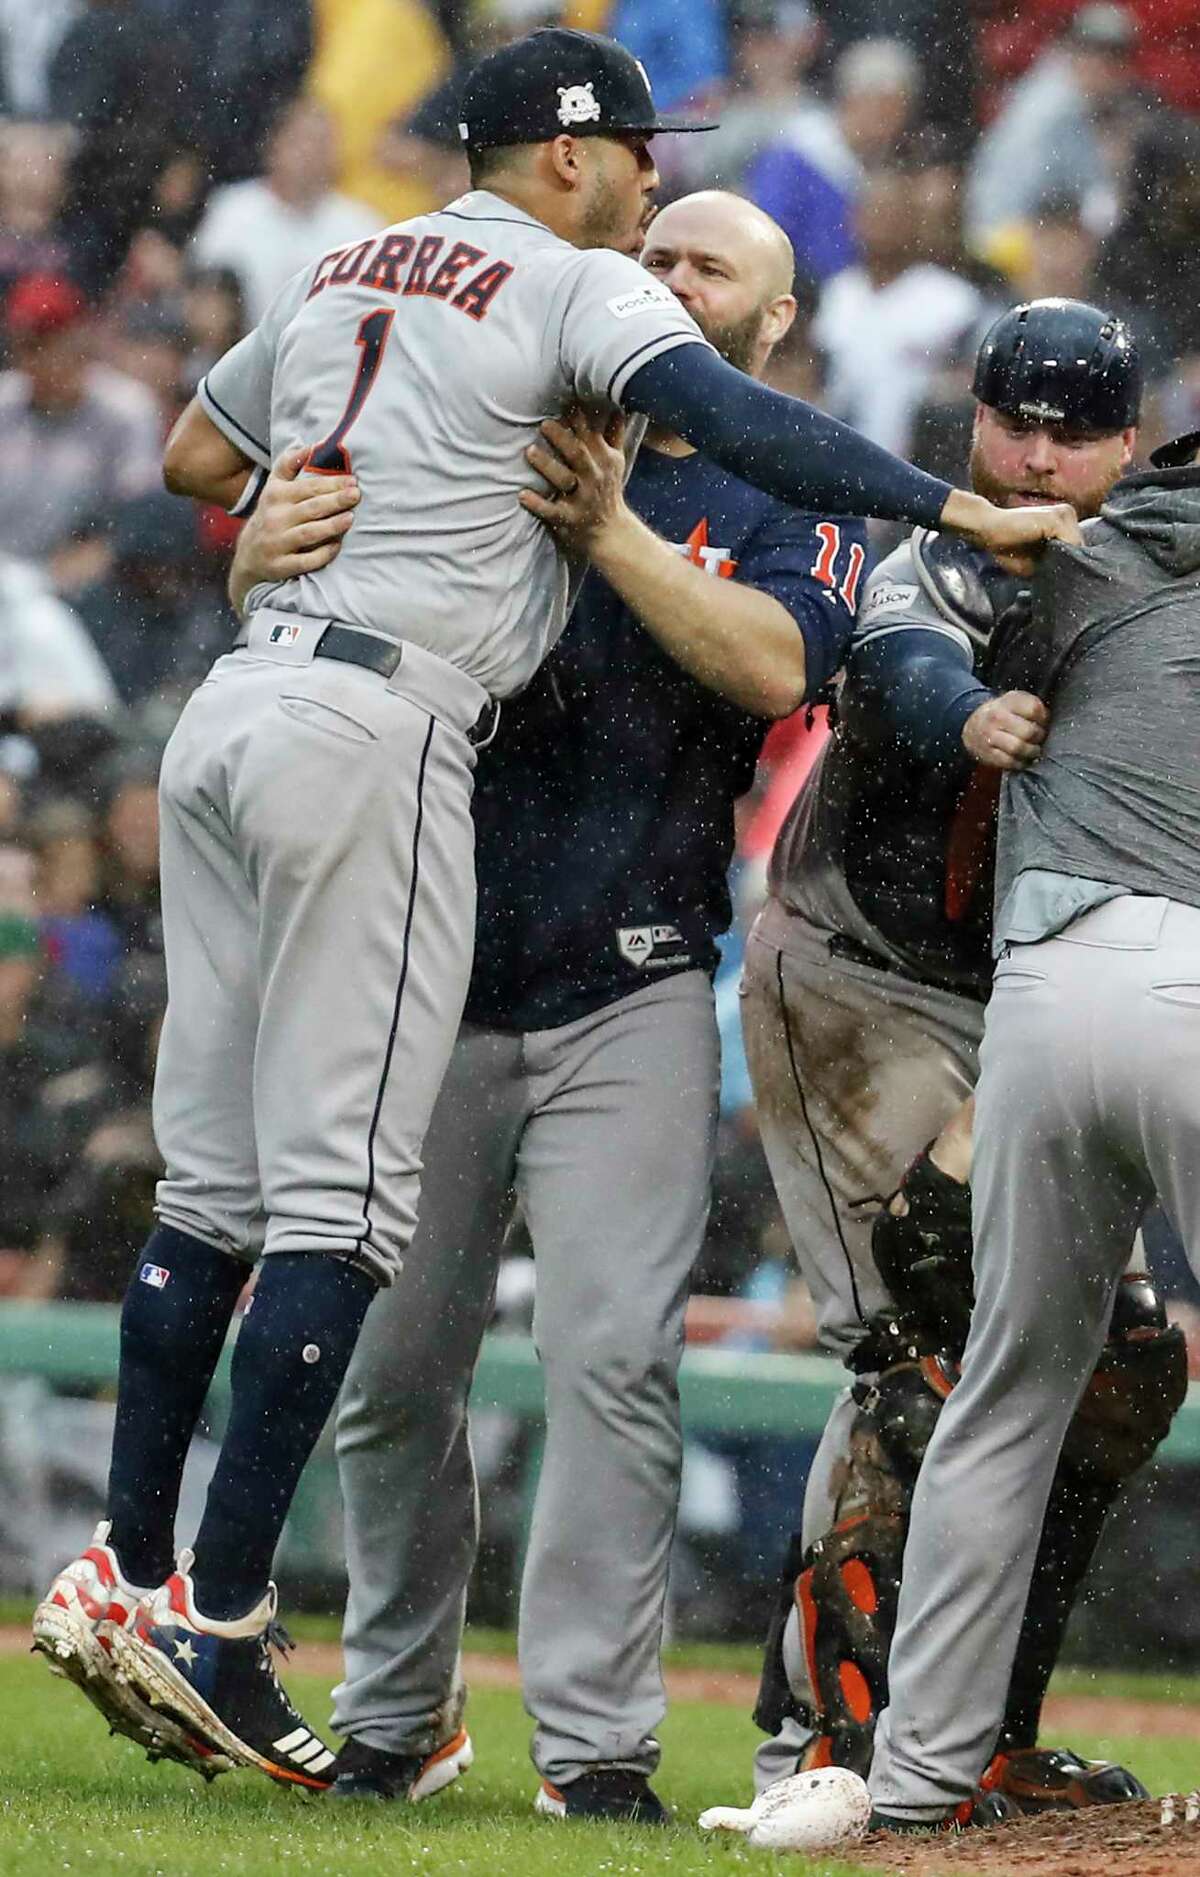 Houston Astros shortstop Carlos Correa (1), designated hitter Evan Gattis (11) and catcher Brian McCann (16) celebrate the Astros 5-4 win over the Boston Red Sox in Game of the ALDS at Fenway Park on Monday, Oct. 9, 2017, in Boston. The Astros won the series 3-1.